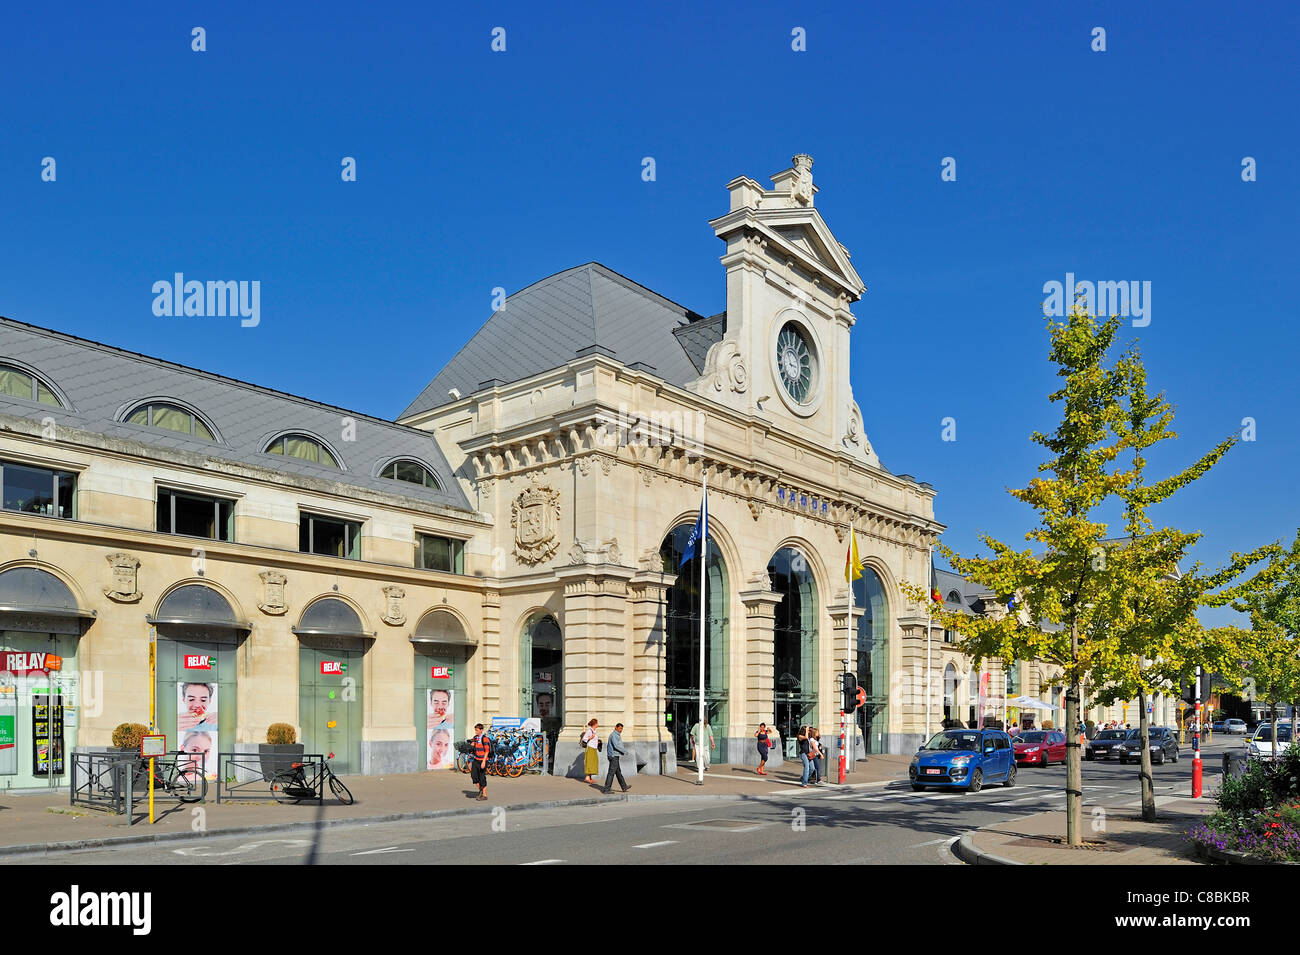 Commuters crossing street in front of the entrance of the railway station Gare de Namur, Belgium Stock Photo